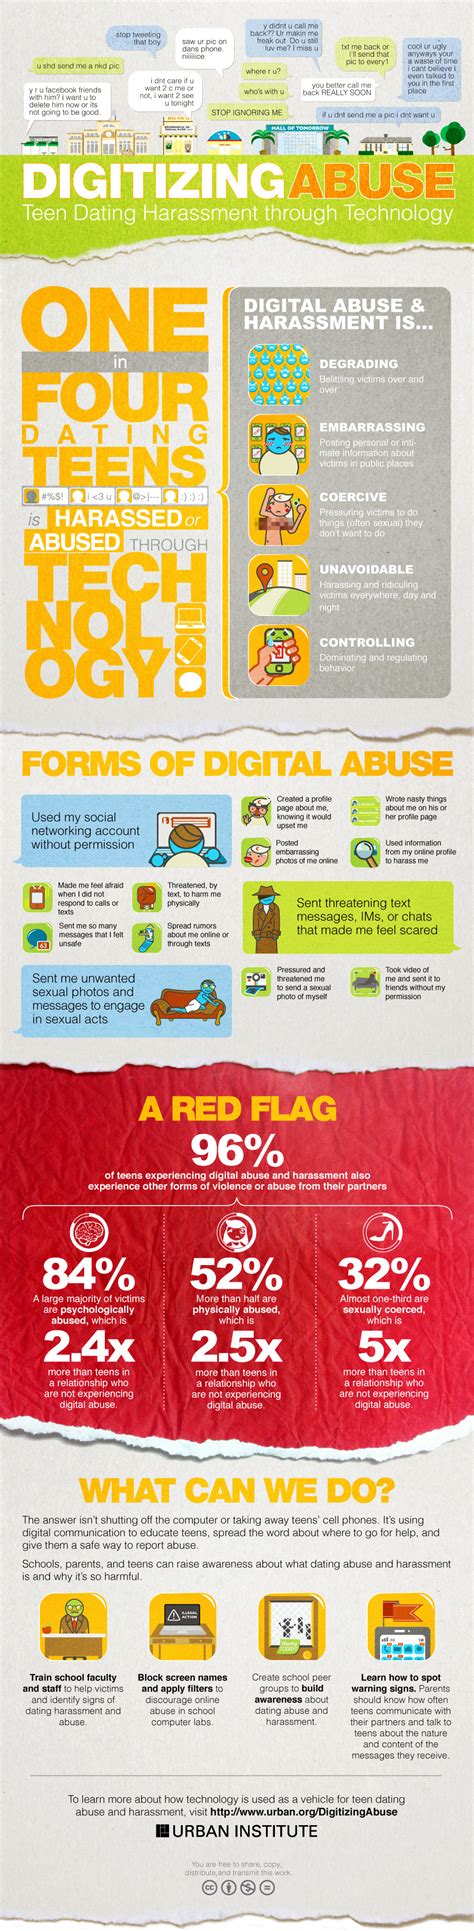 An Infographic About Online Sexual Abuse And Harassment